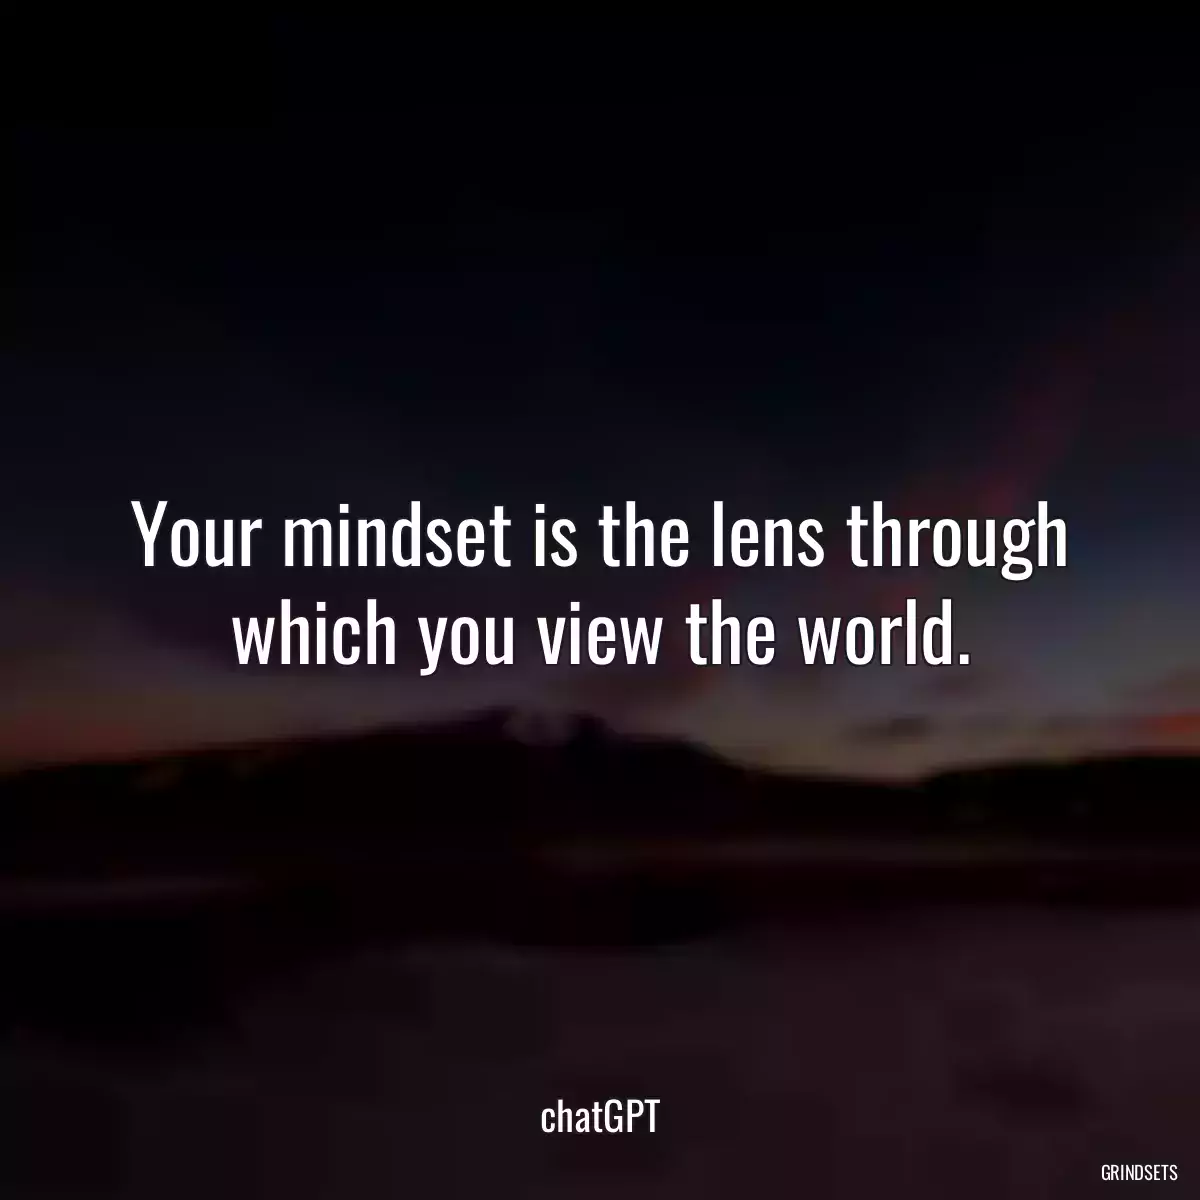 Your mindset is the lens through which you view the world.